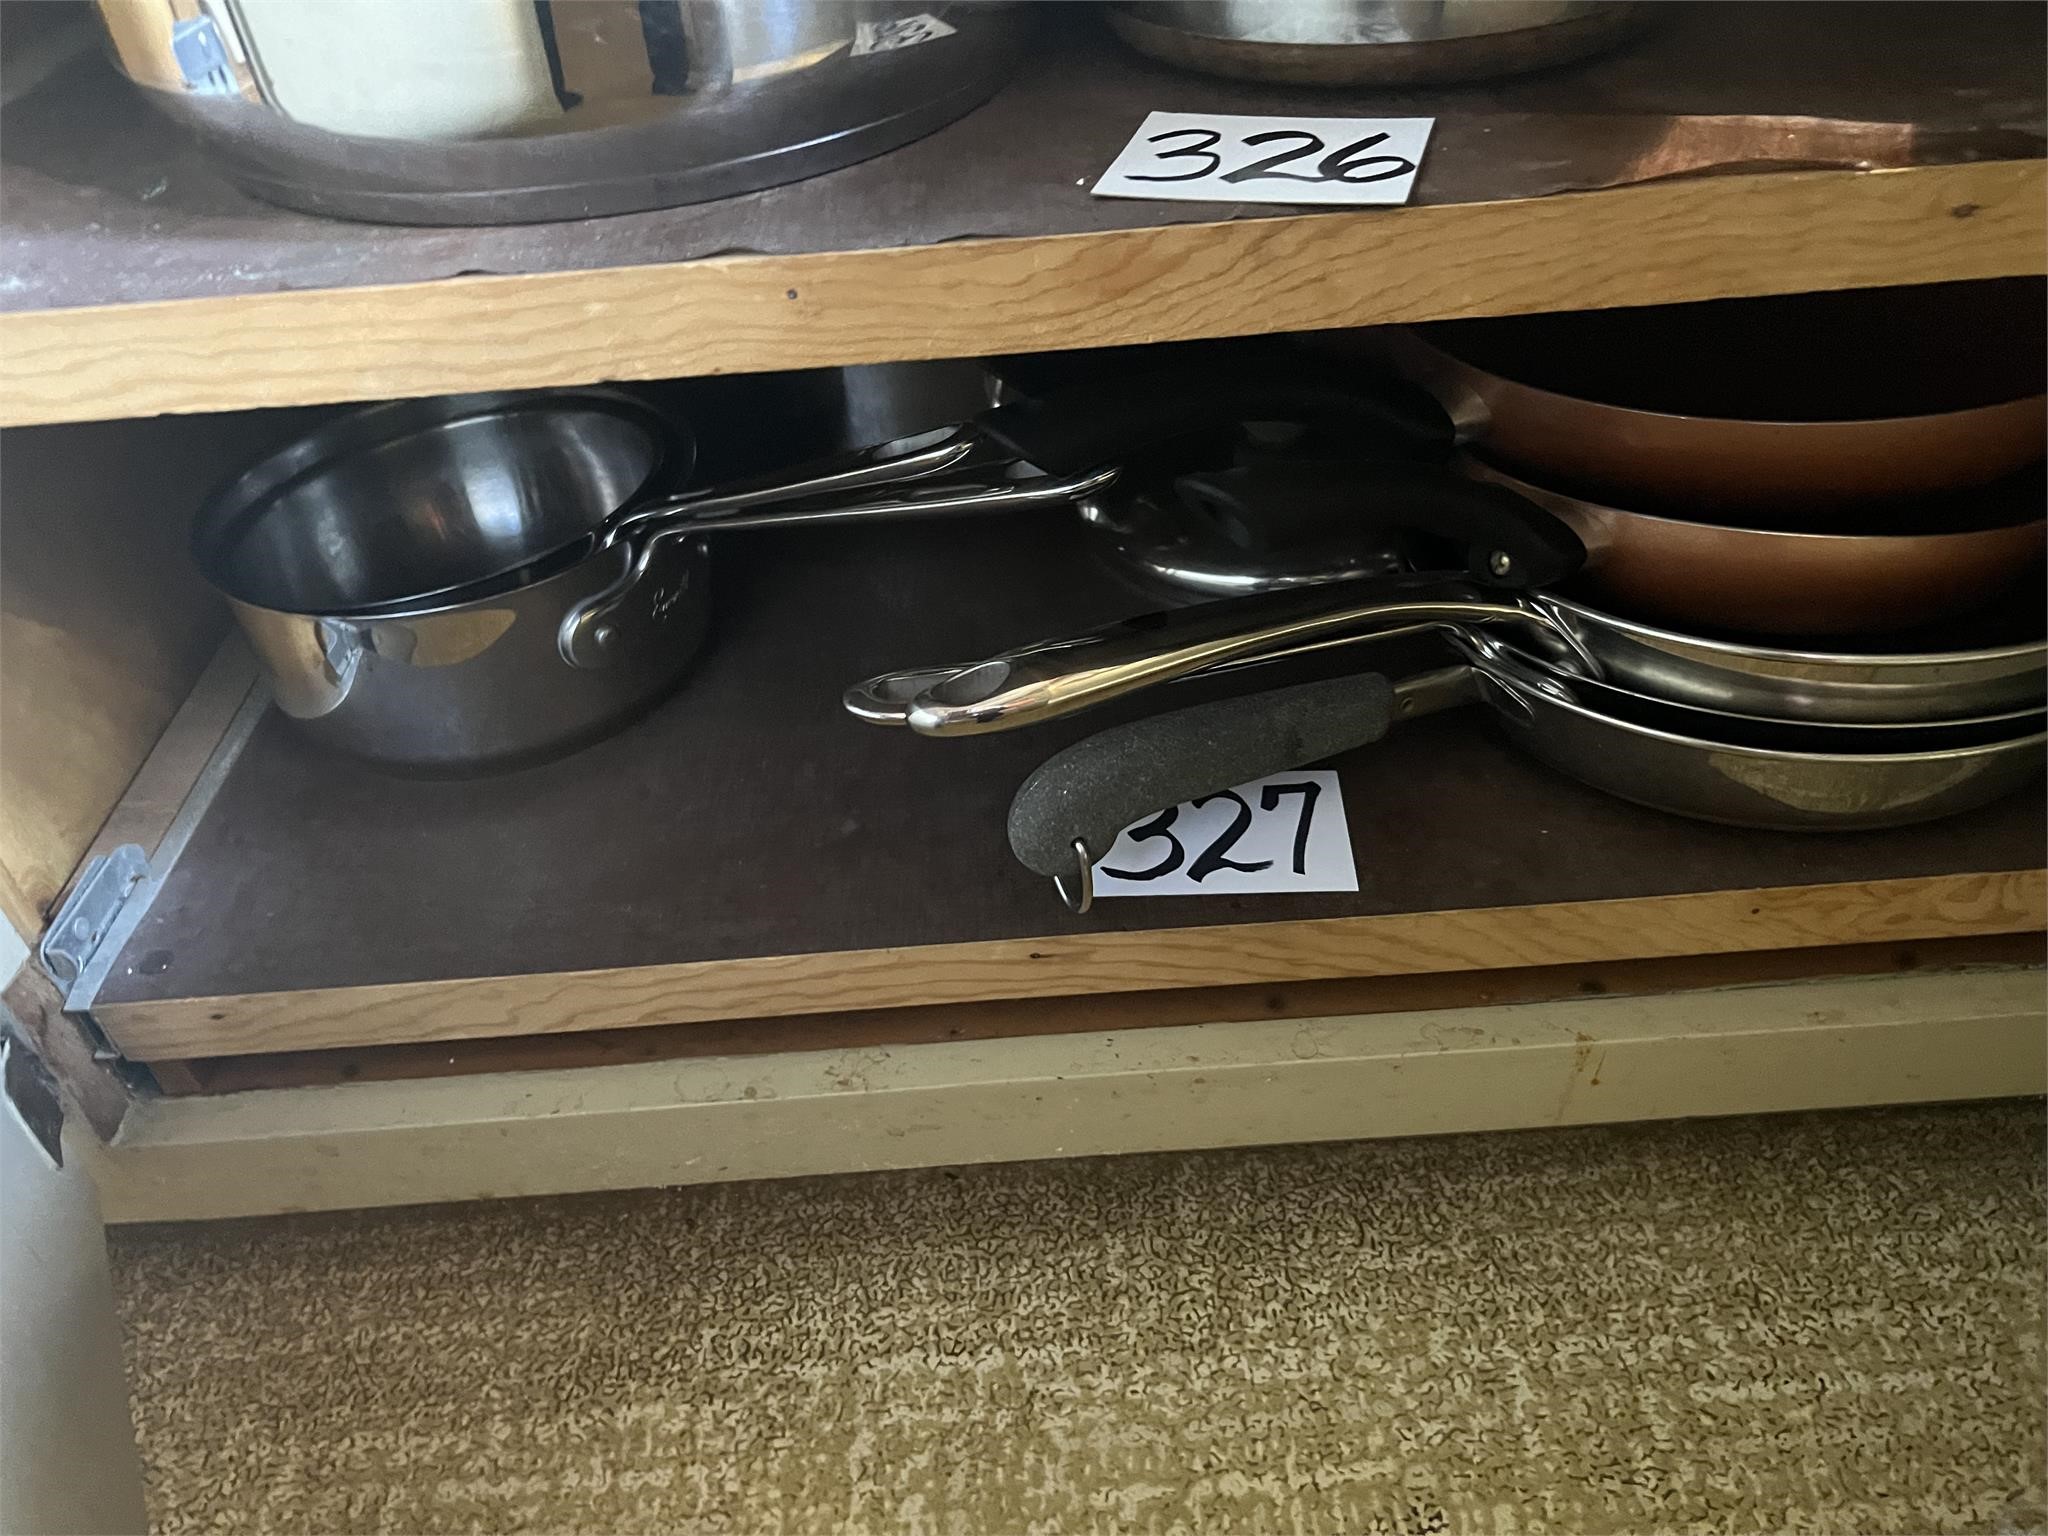 lot of fying pans